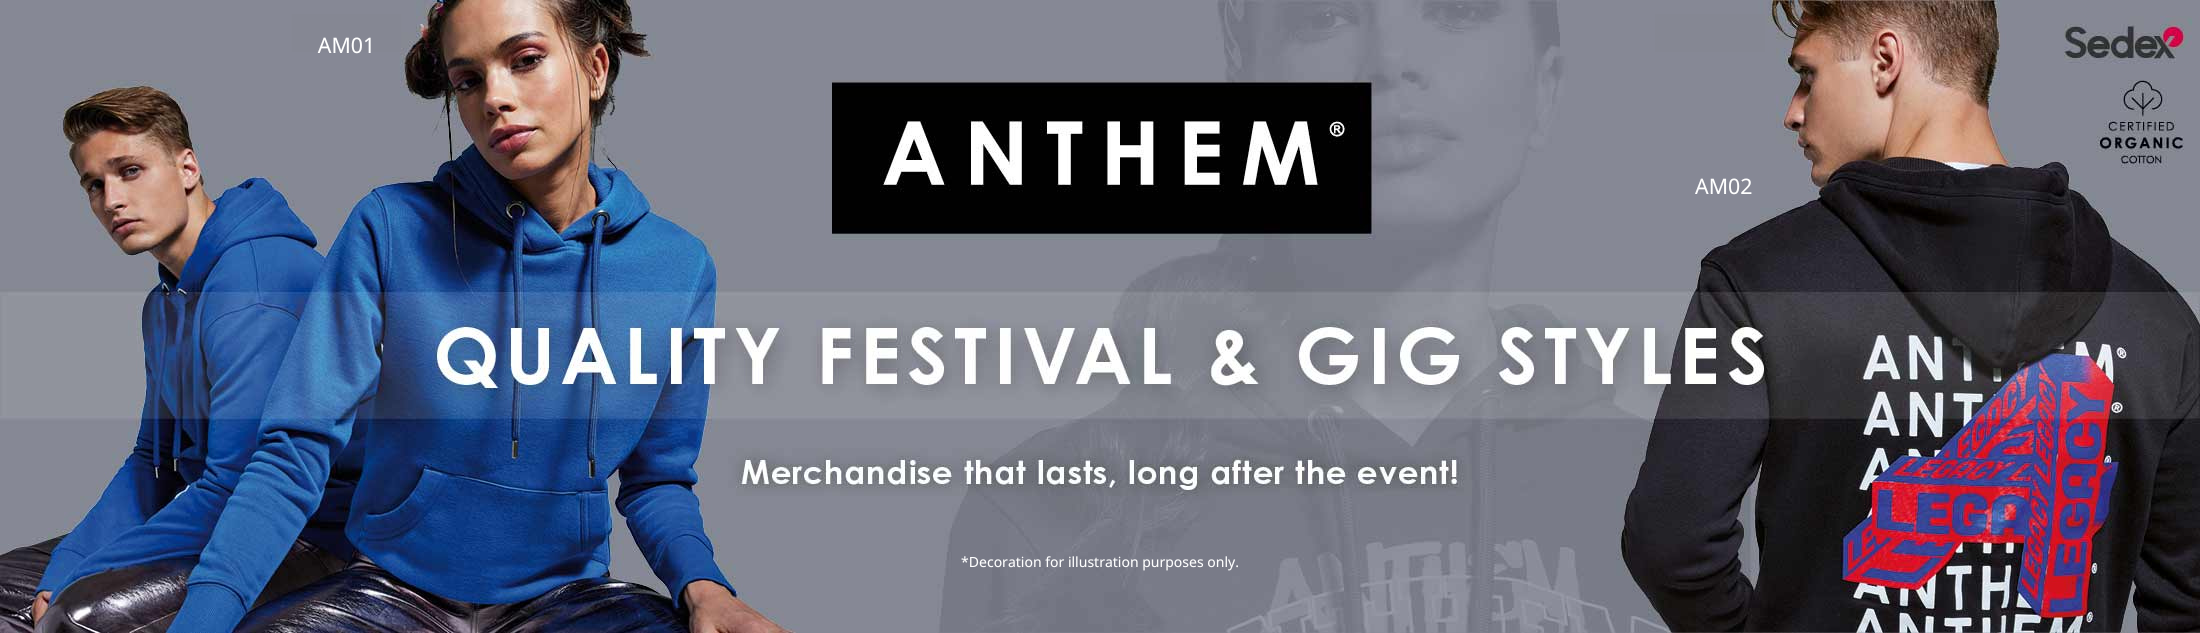 Get festival & gig ready with Anthem